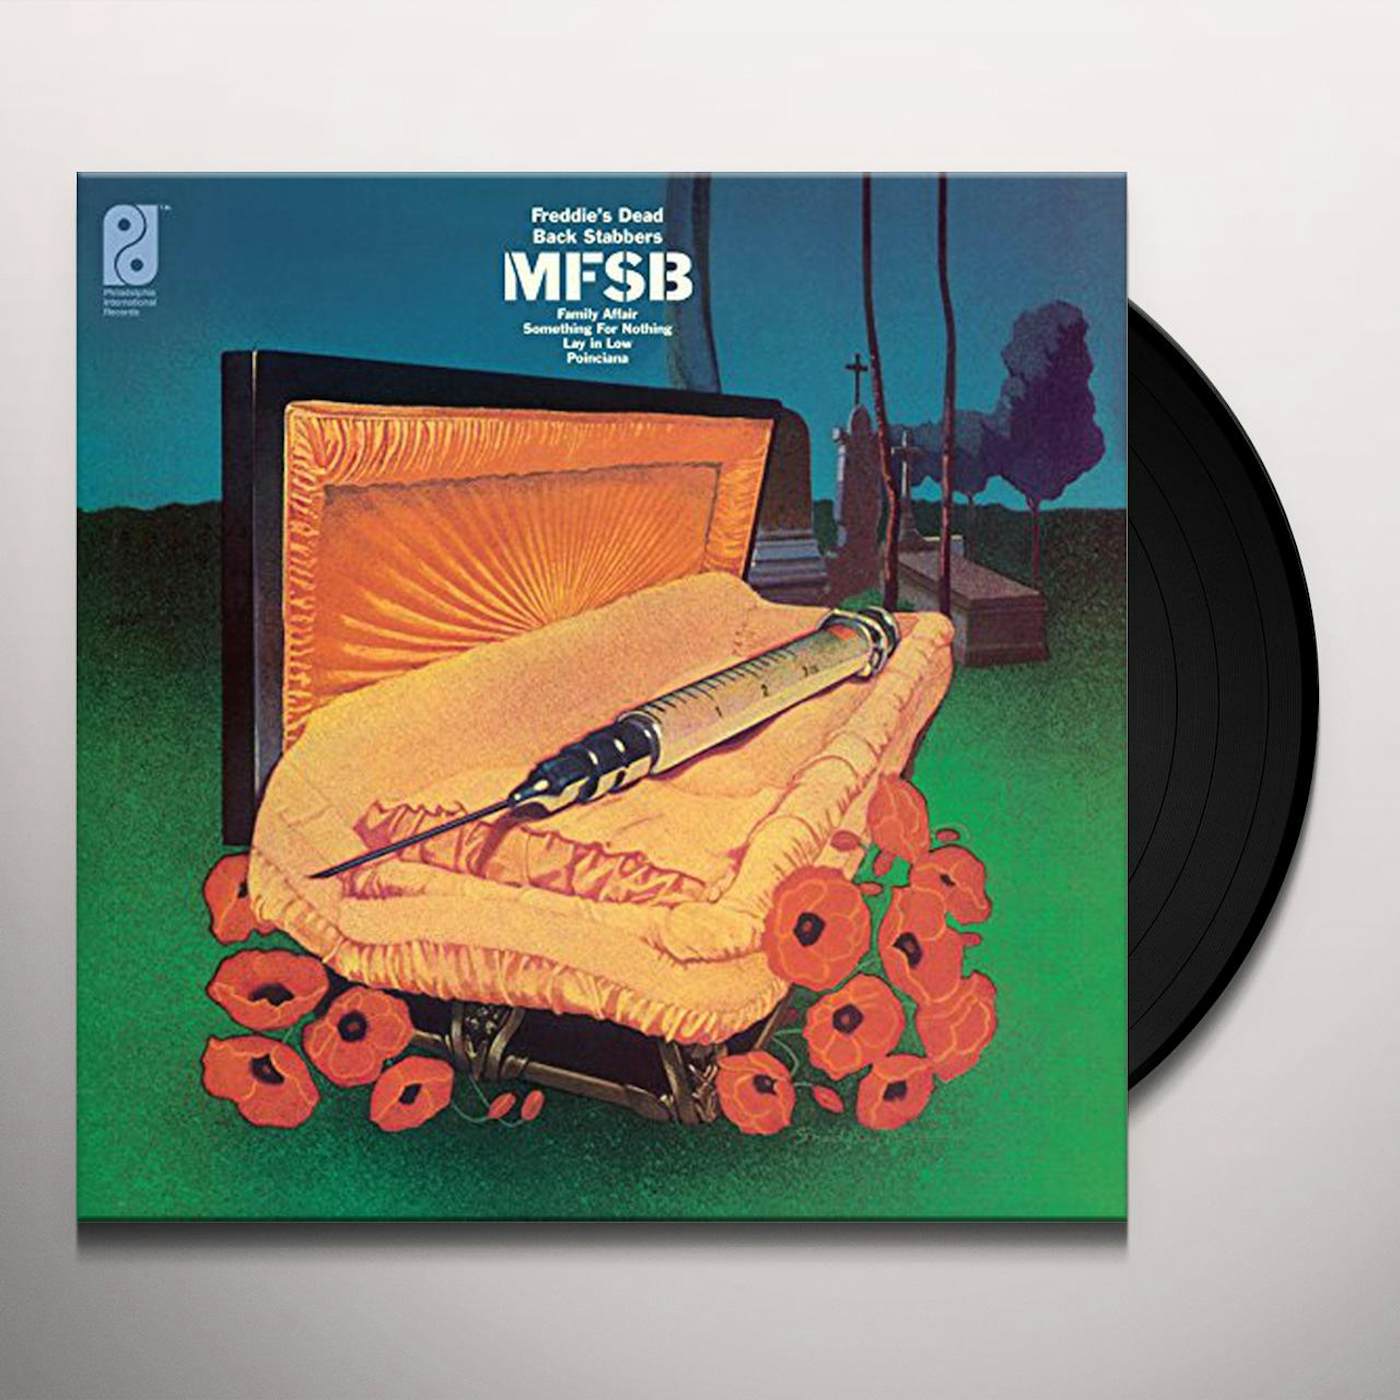 MFSB (MOTHER FATHER SISTER BROTHER) Vinyl Record